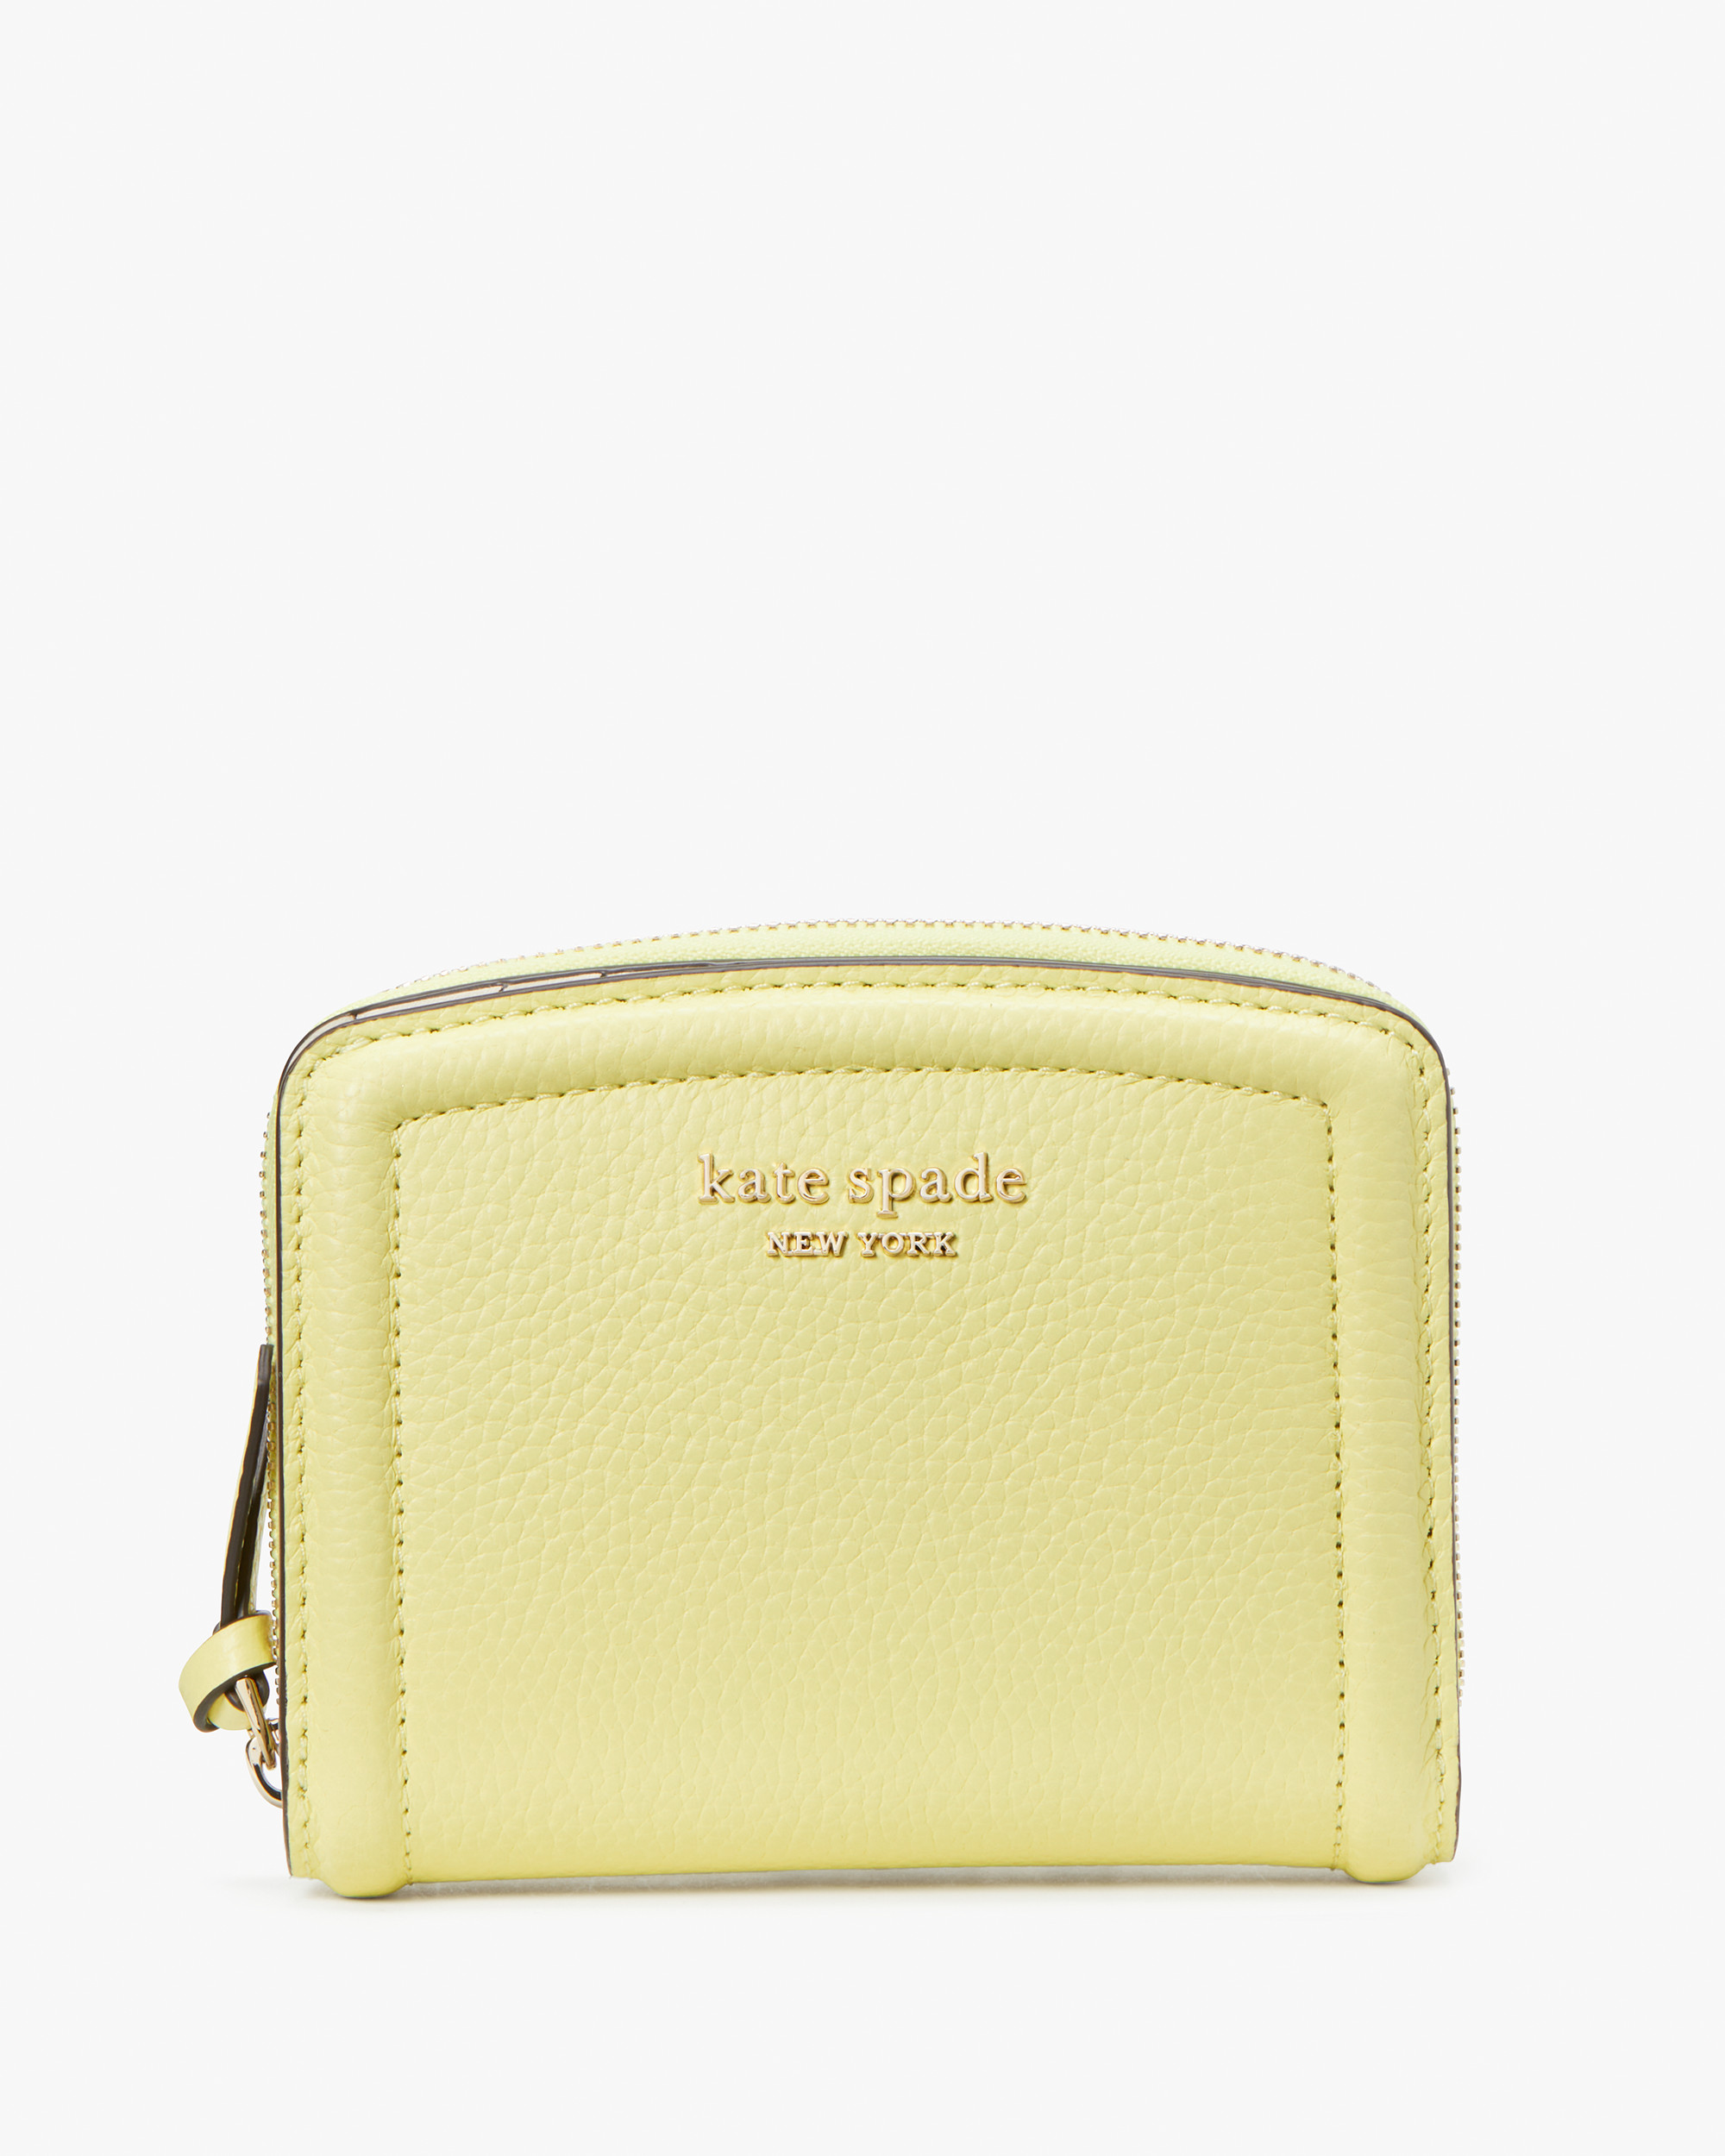 Kate Spade Knott Small Compact Wallet